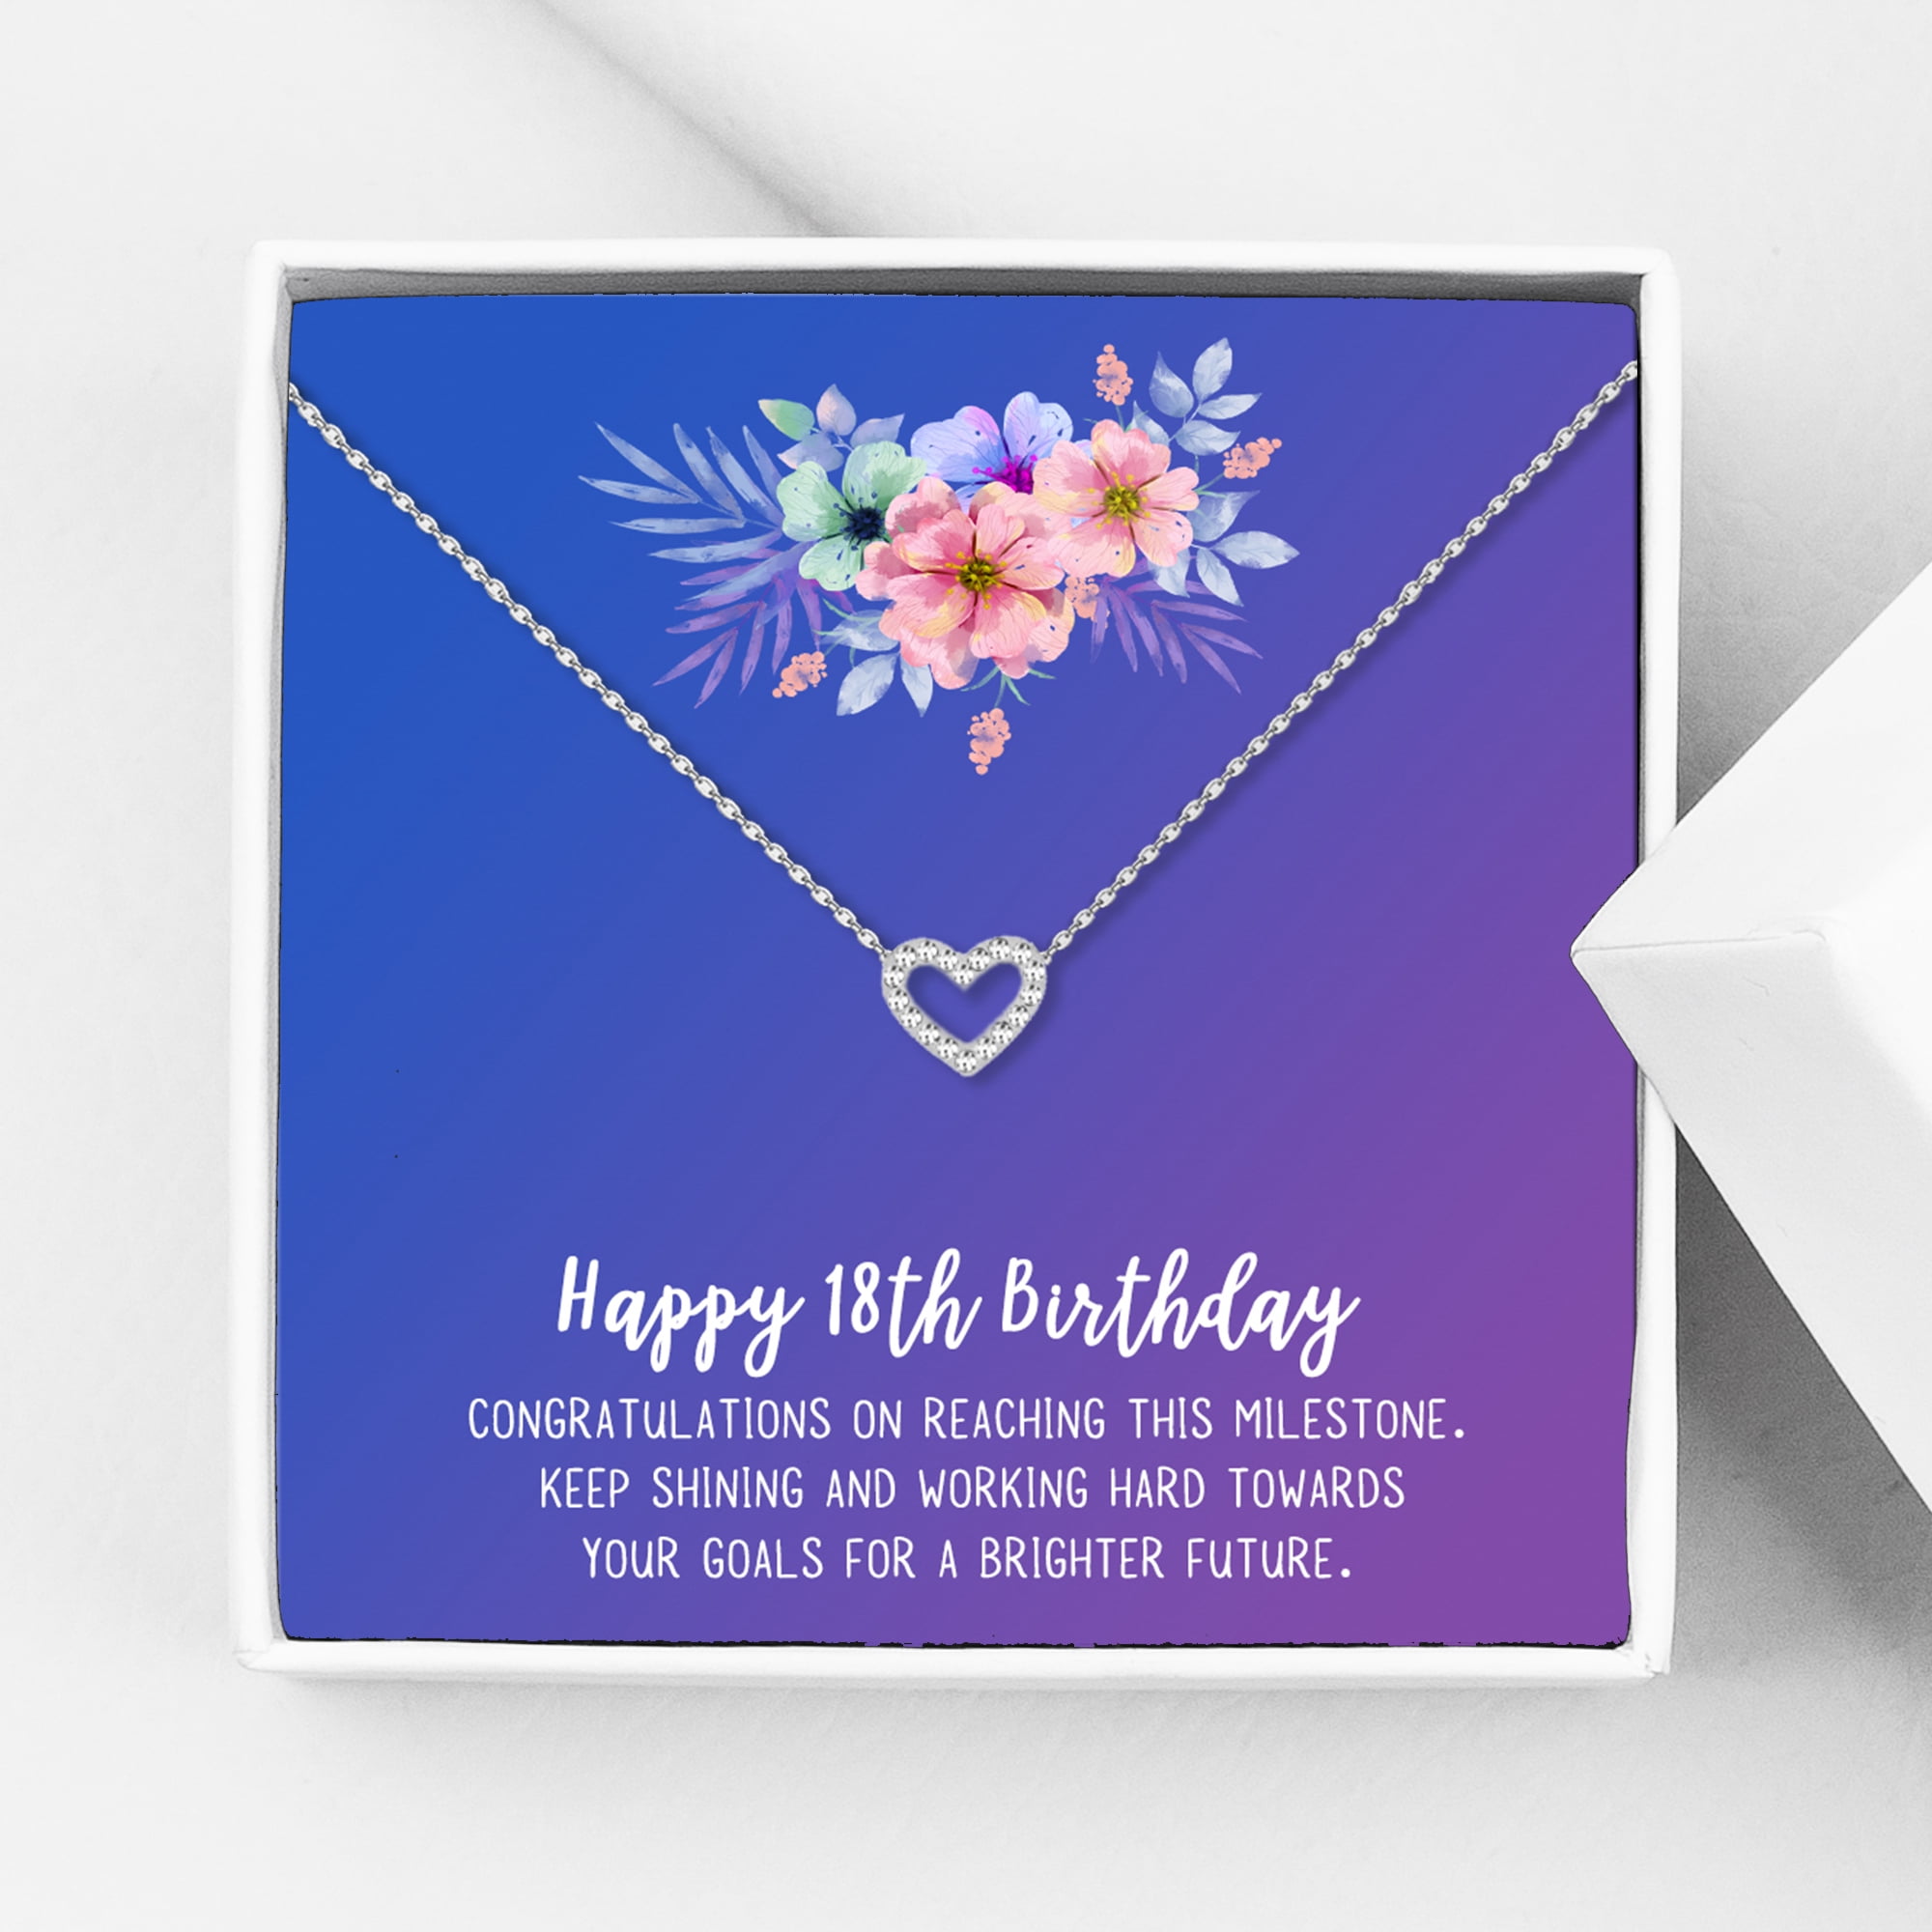 FG Family Gift Mall 18th Birthday Gifts For 18 Year Old Girl Birthday Gift  Ideas For Her Happy 18th Birthday Card Best Top Jewelry Gifts For Girls